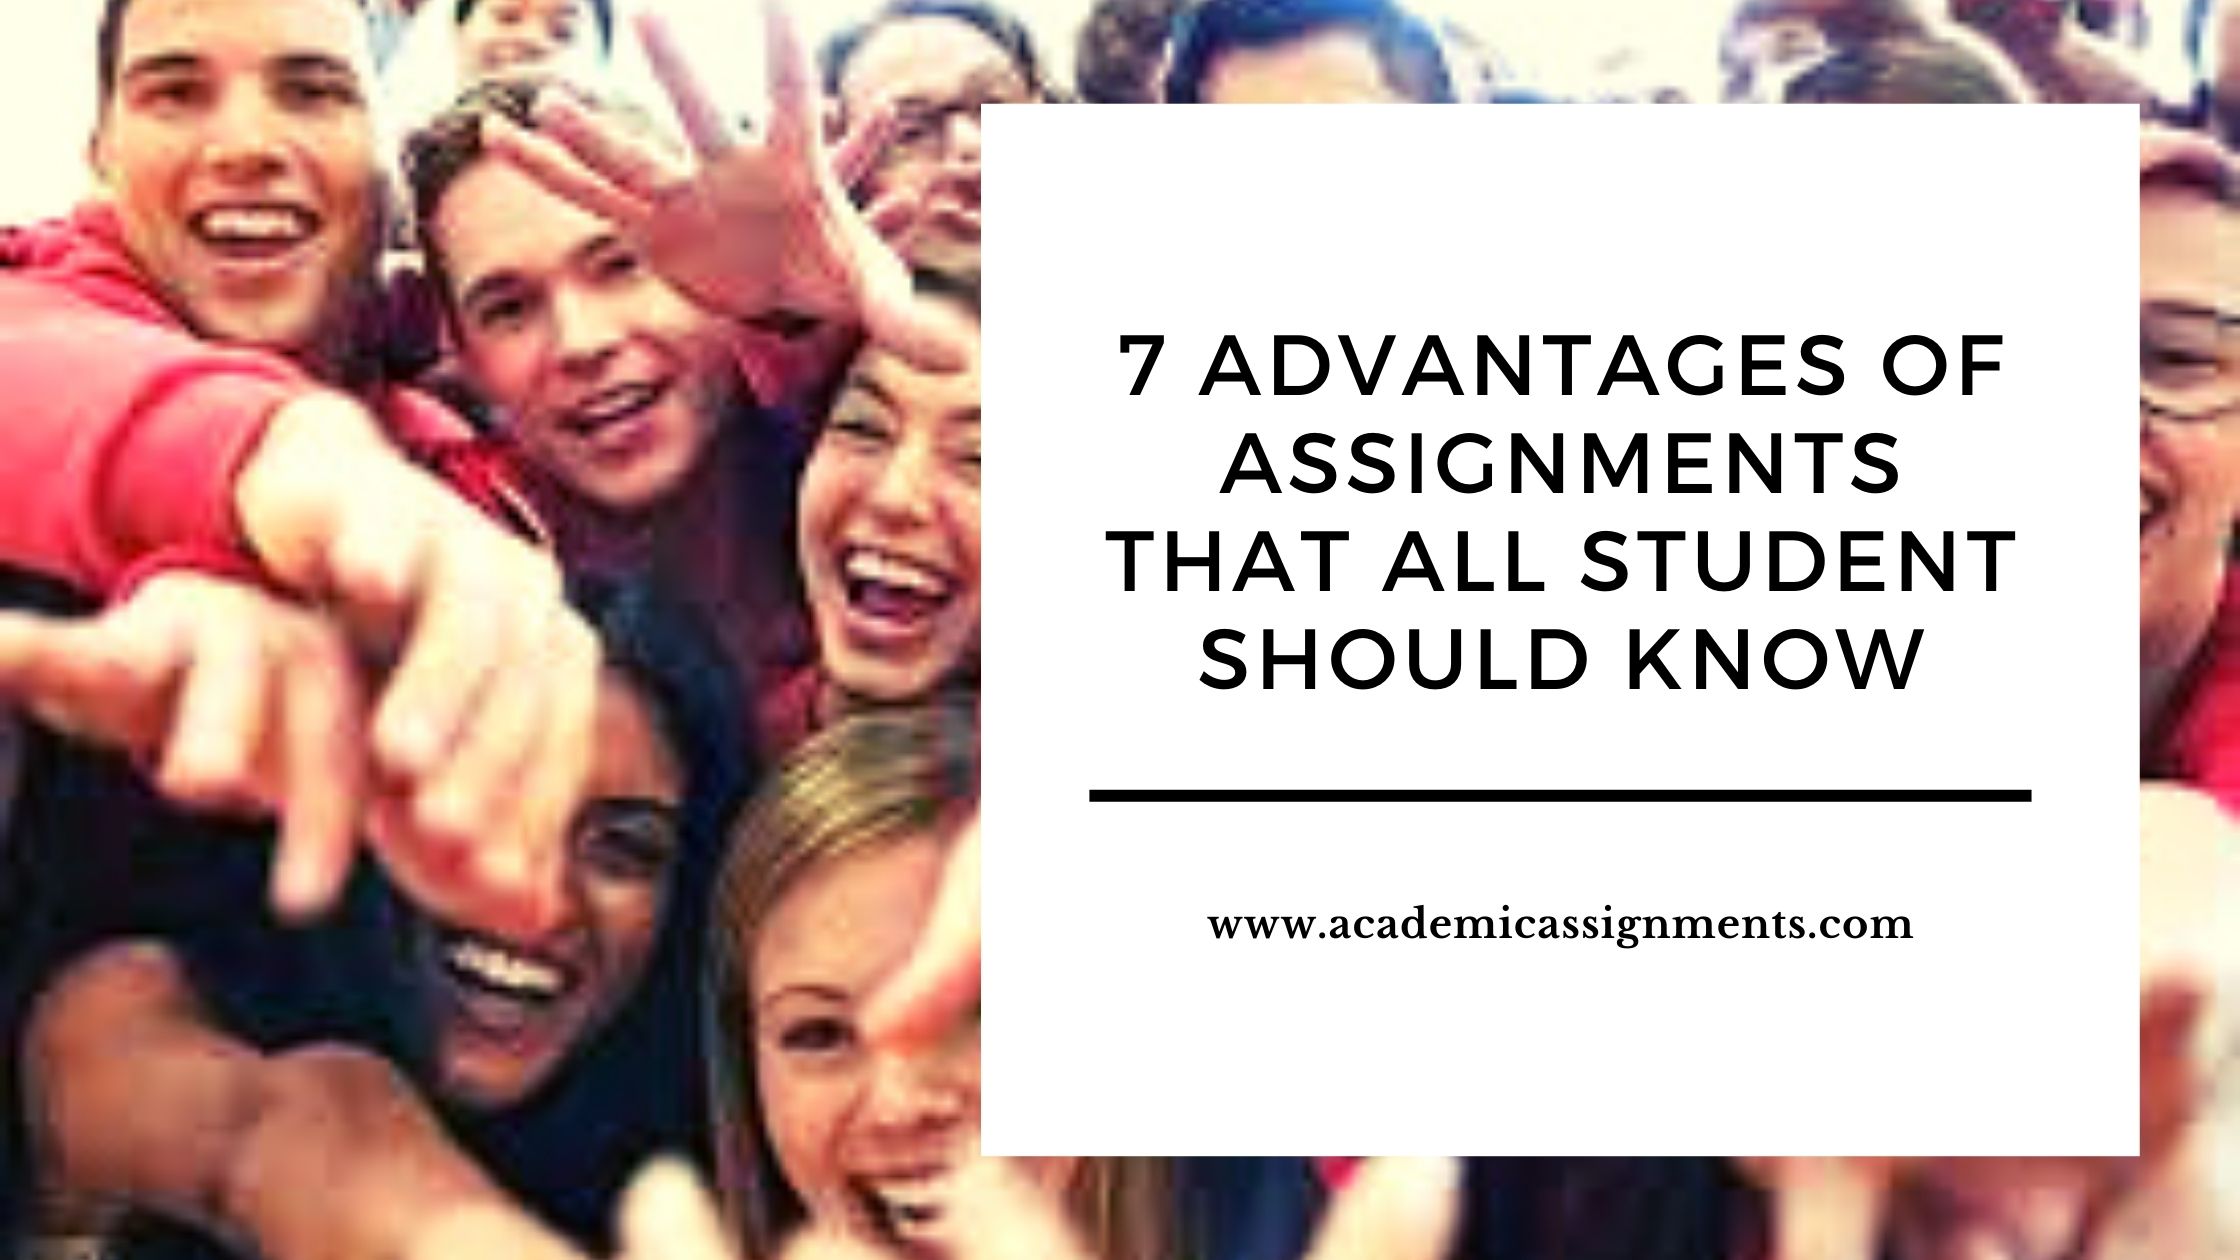 7 Advantages of Assignments That All Student Should Know